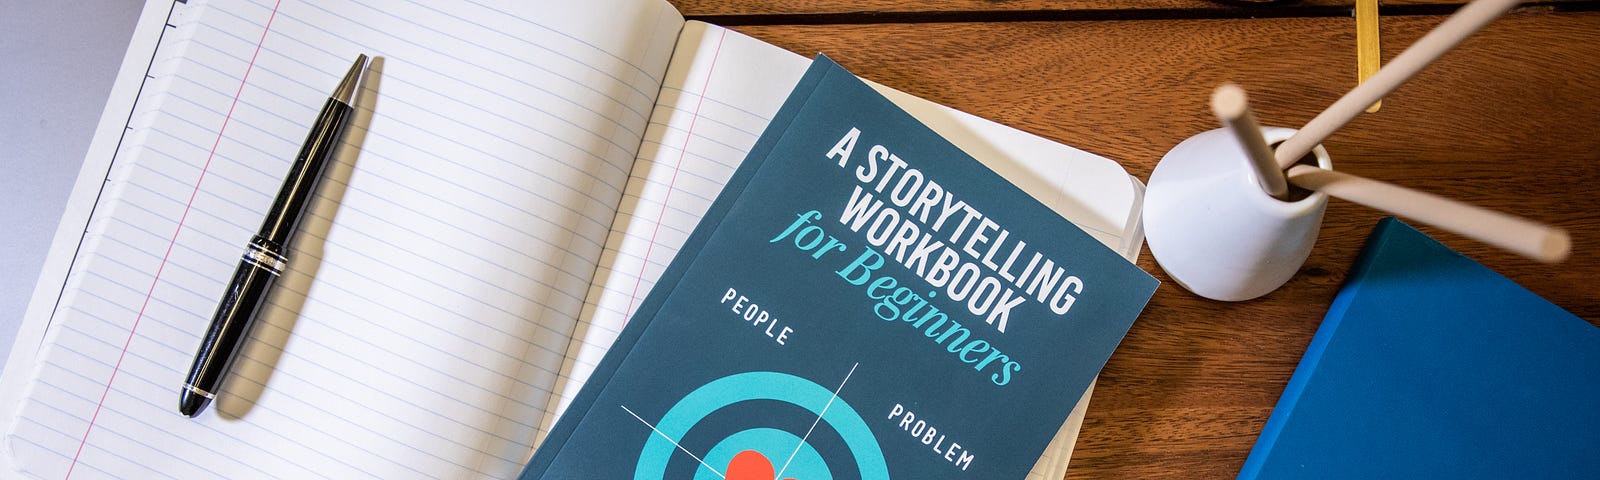 pic of a book entitled A Storytelling Workbook for Beginners